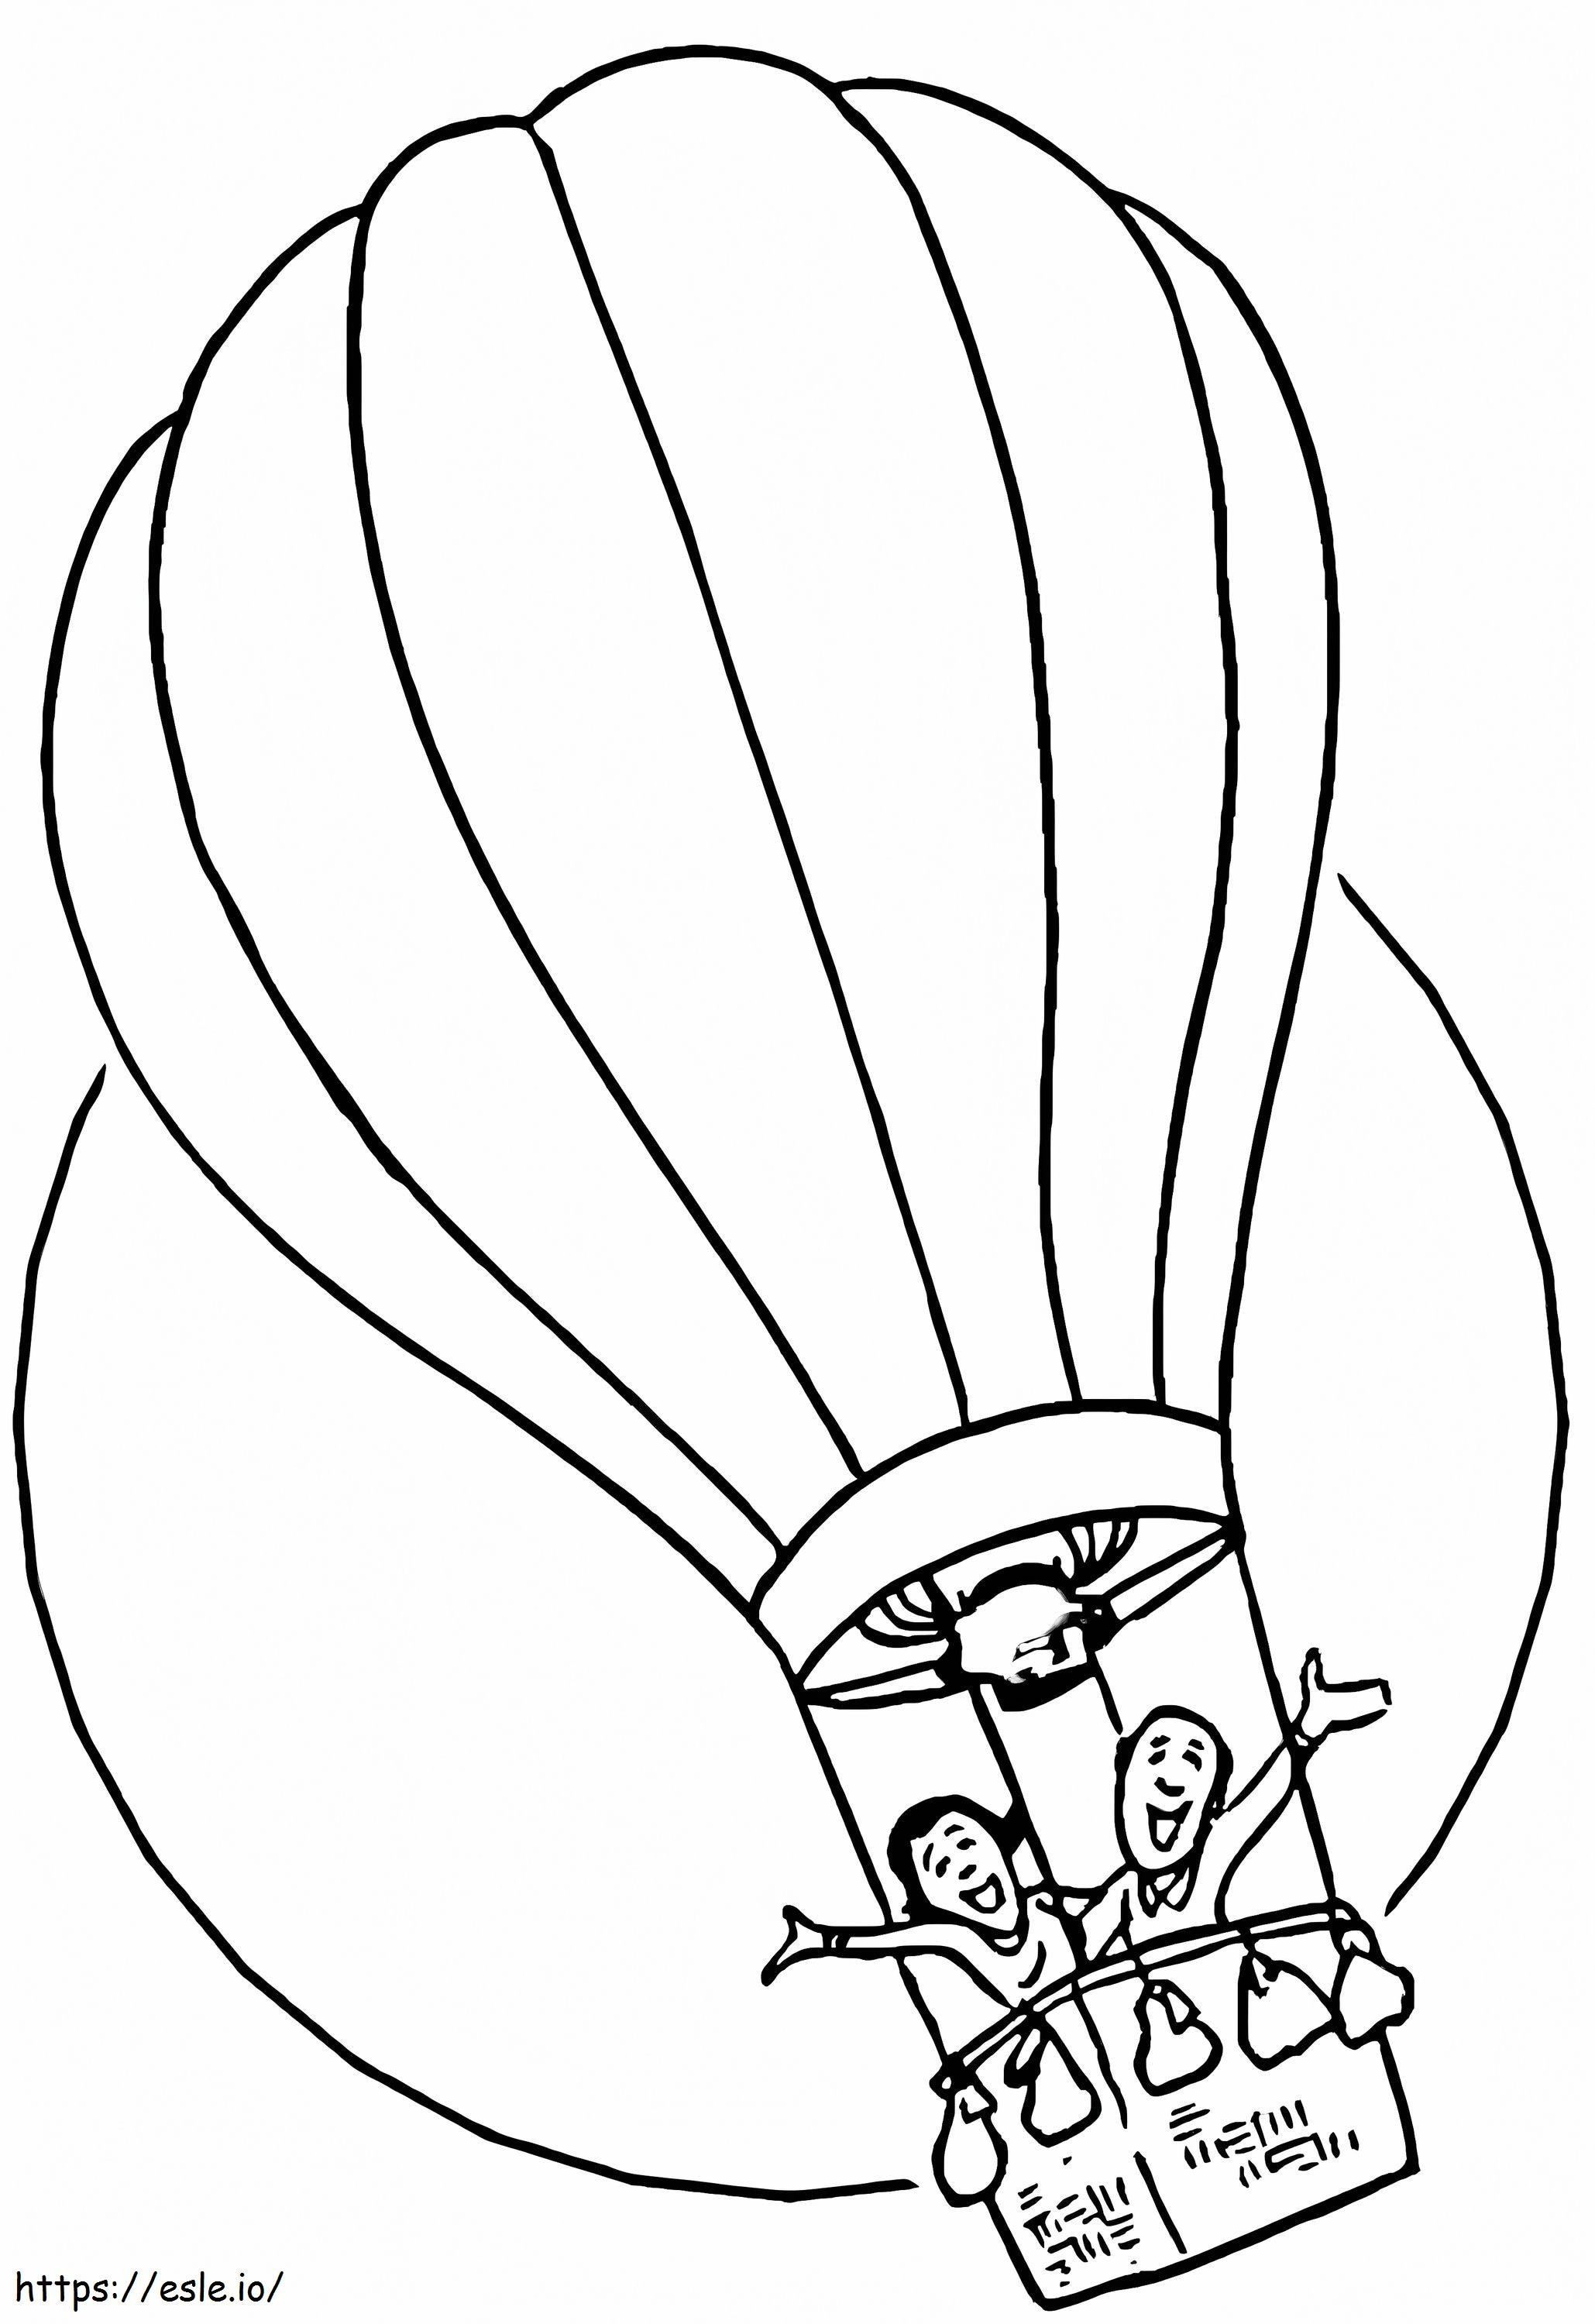 Couple In Hot Air Balloon coloring page